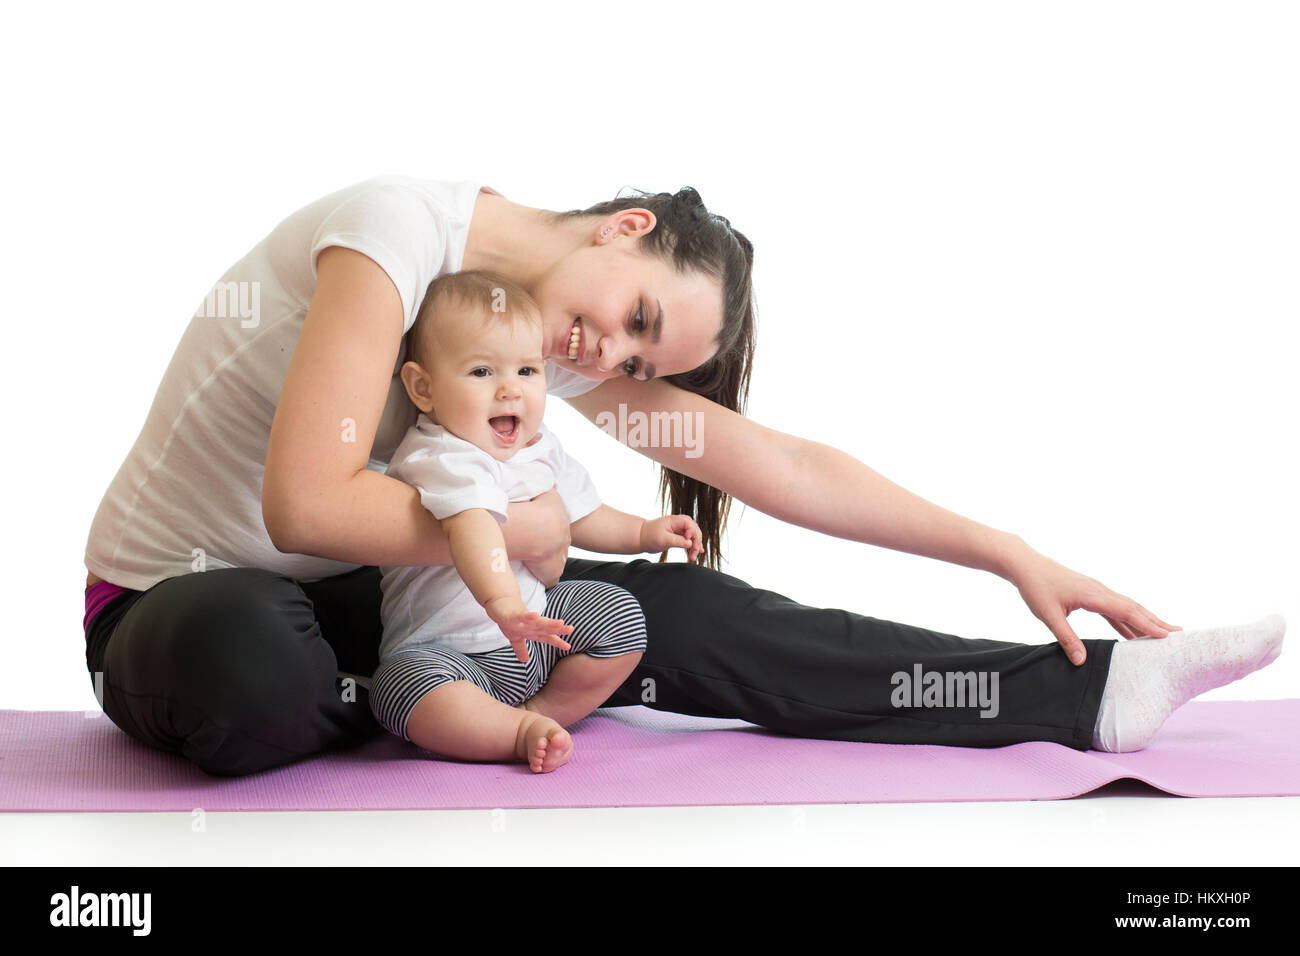 Young woman mother doing fitness exercises with baby, studio portrait isolated on white background Stock Photo